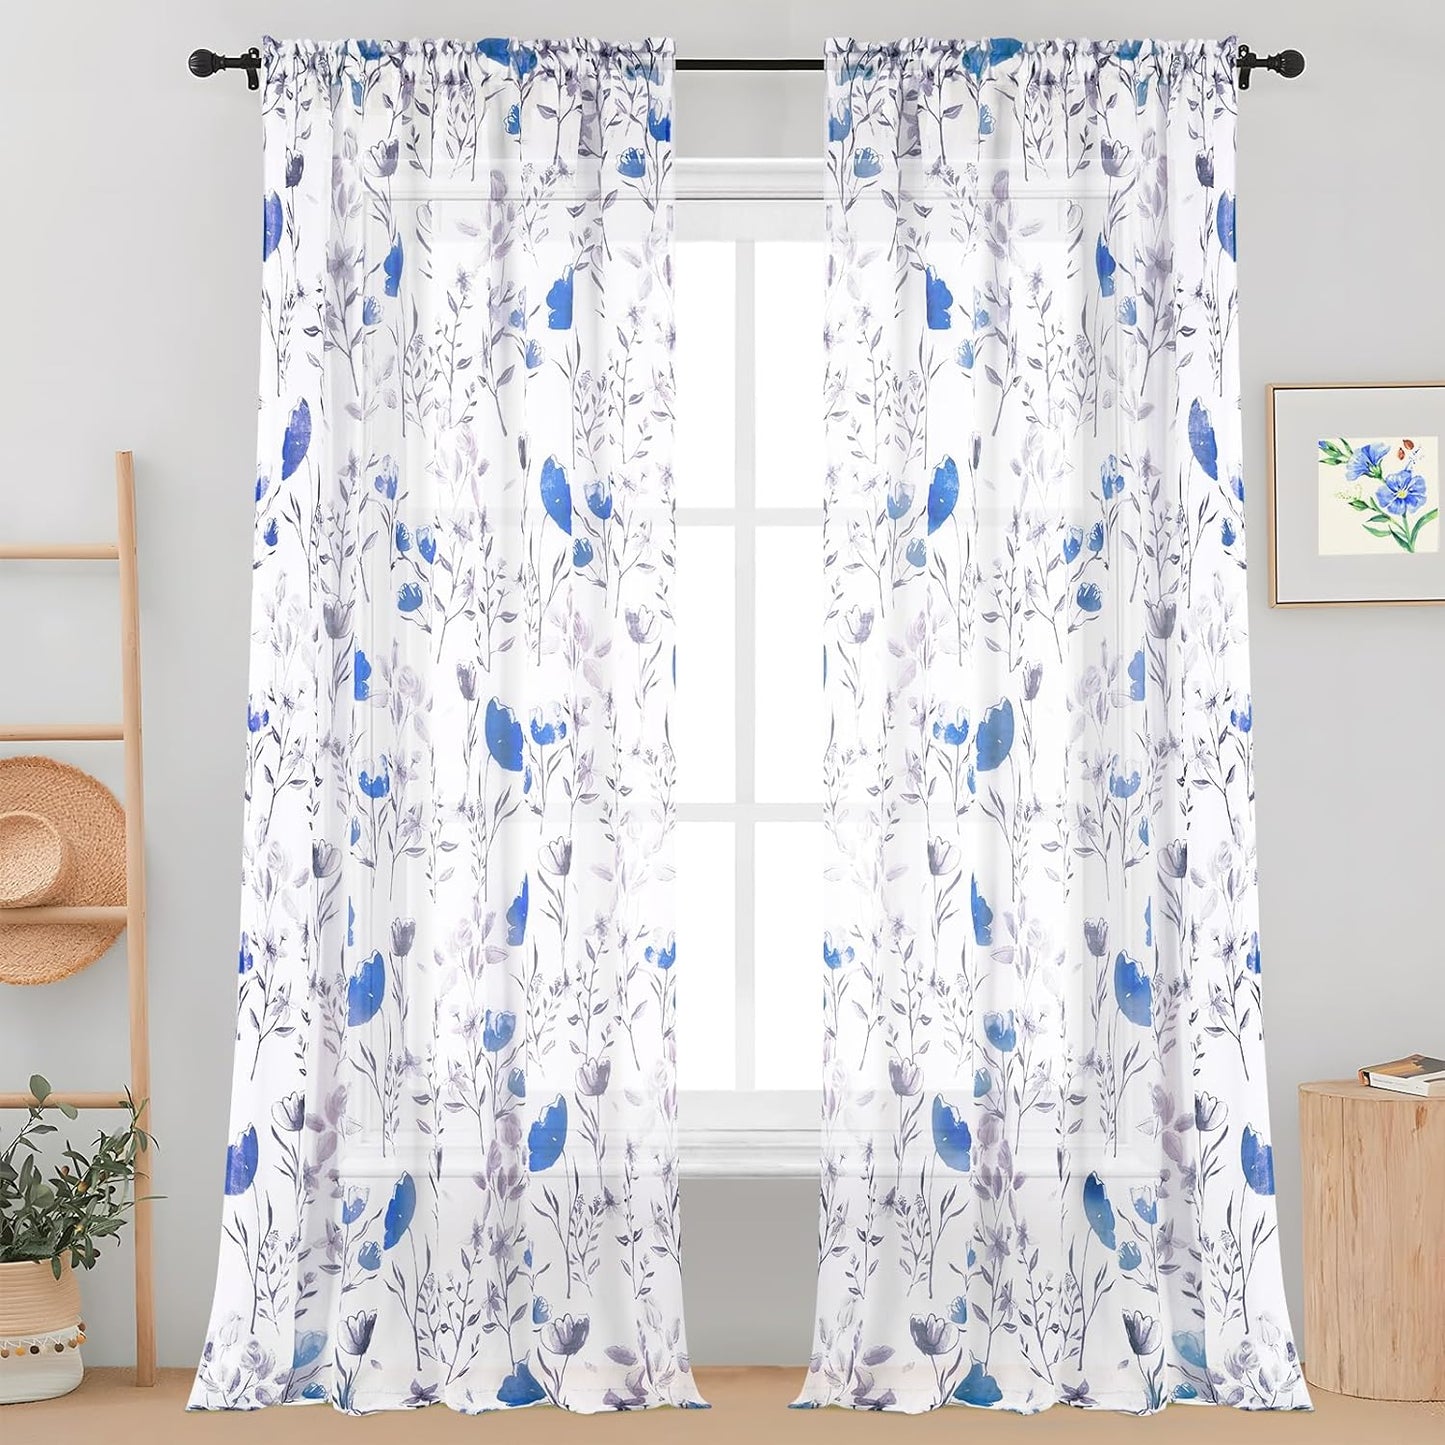 Likiyol Floral Kithchen Curtains 36 Inch Watercolor Flower Leaves Tier Curtains, Yellow and Gray Floral Cafe Curtains, Rod Pocket Small Window Curtain for Cafe Bathroom Bedroom Drapes  Likiyol Blue Sheer 84"L X 52"W 